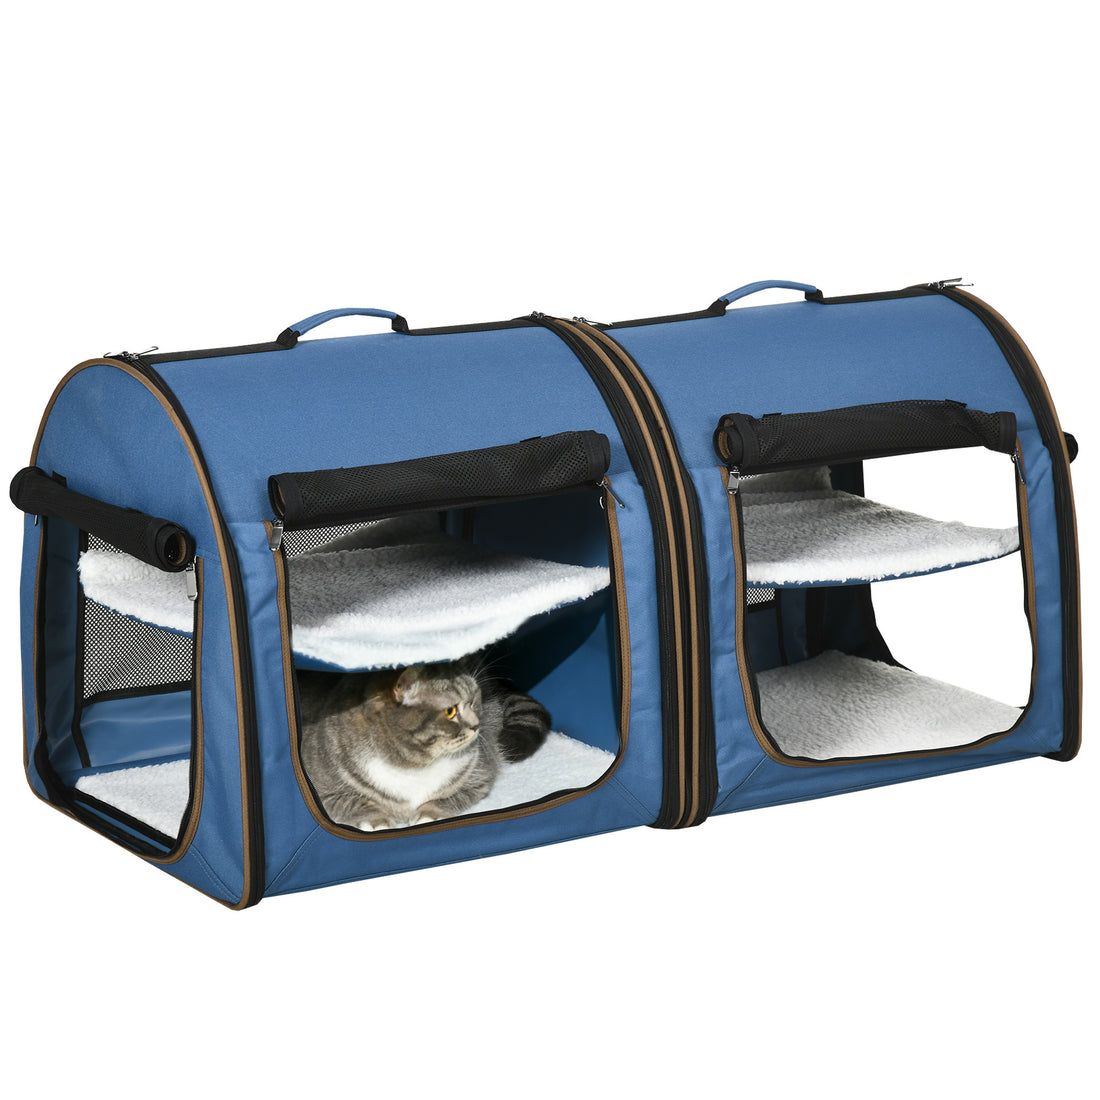 PawHut 39" Portable Soft Sided Pet Cat Carrier with blue-metal